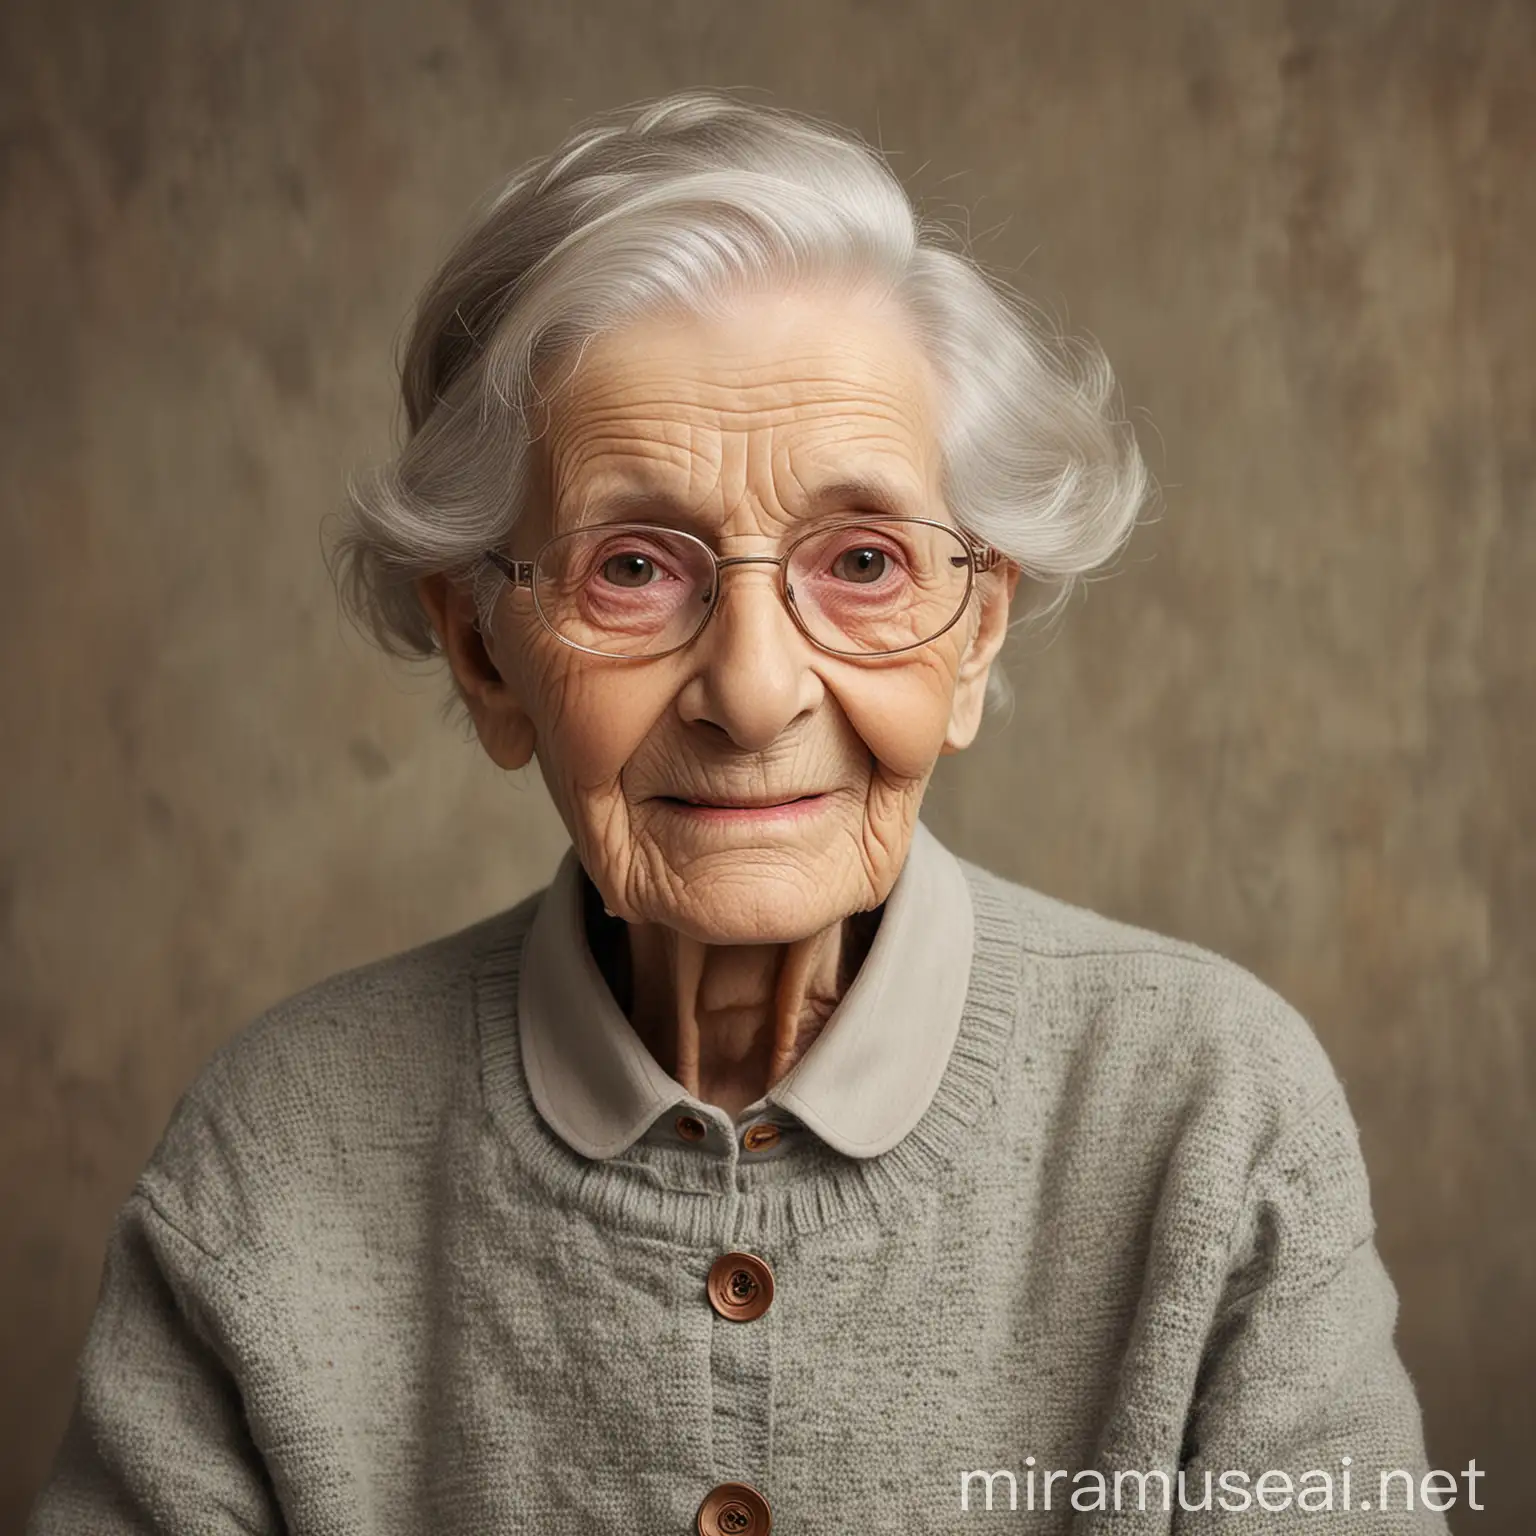 99 years Old person